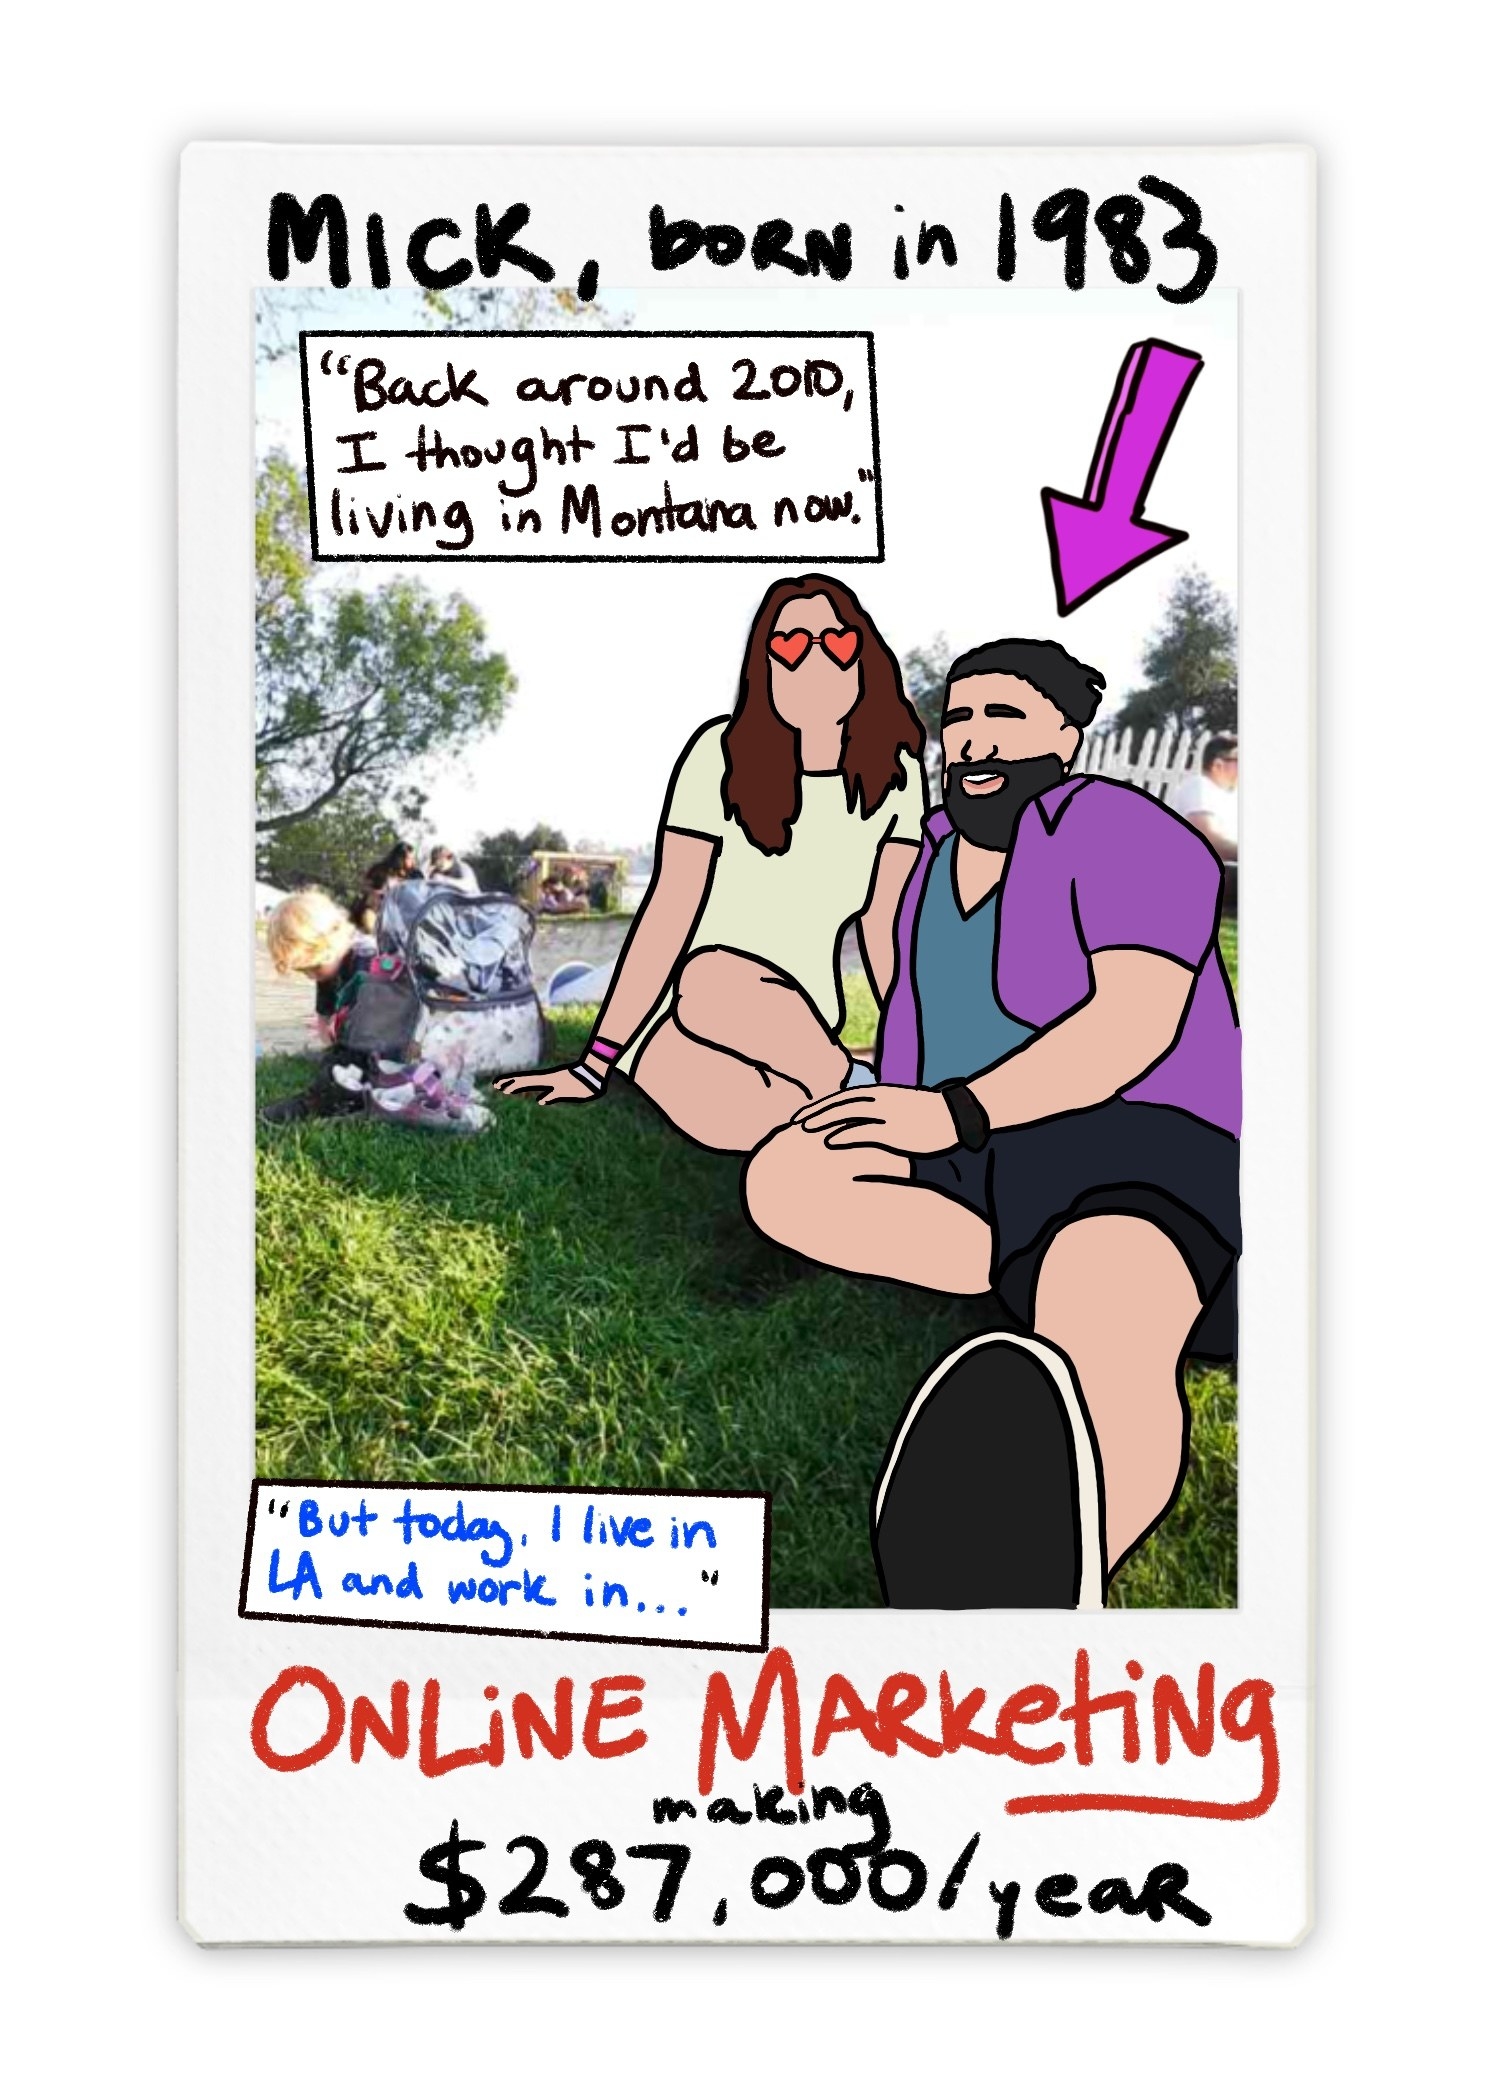 mick in online marketing used to think he'd be stuck in montana